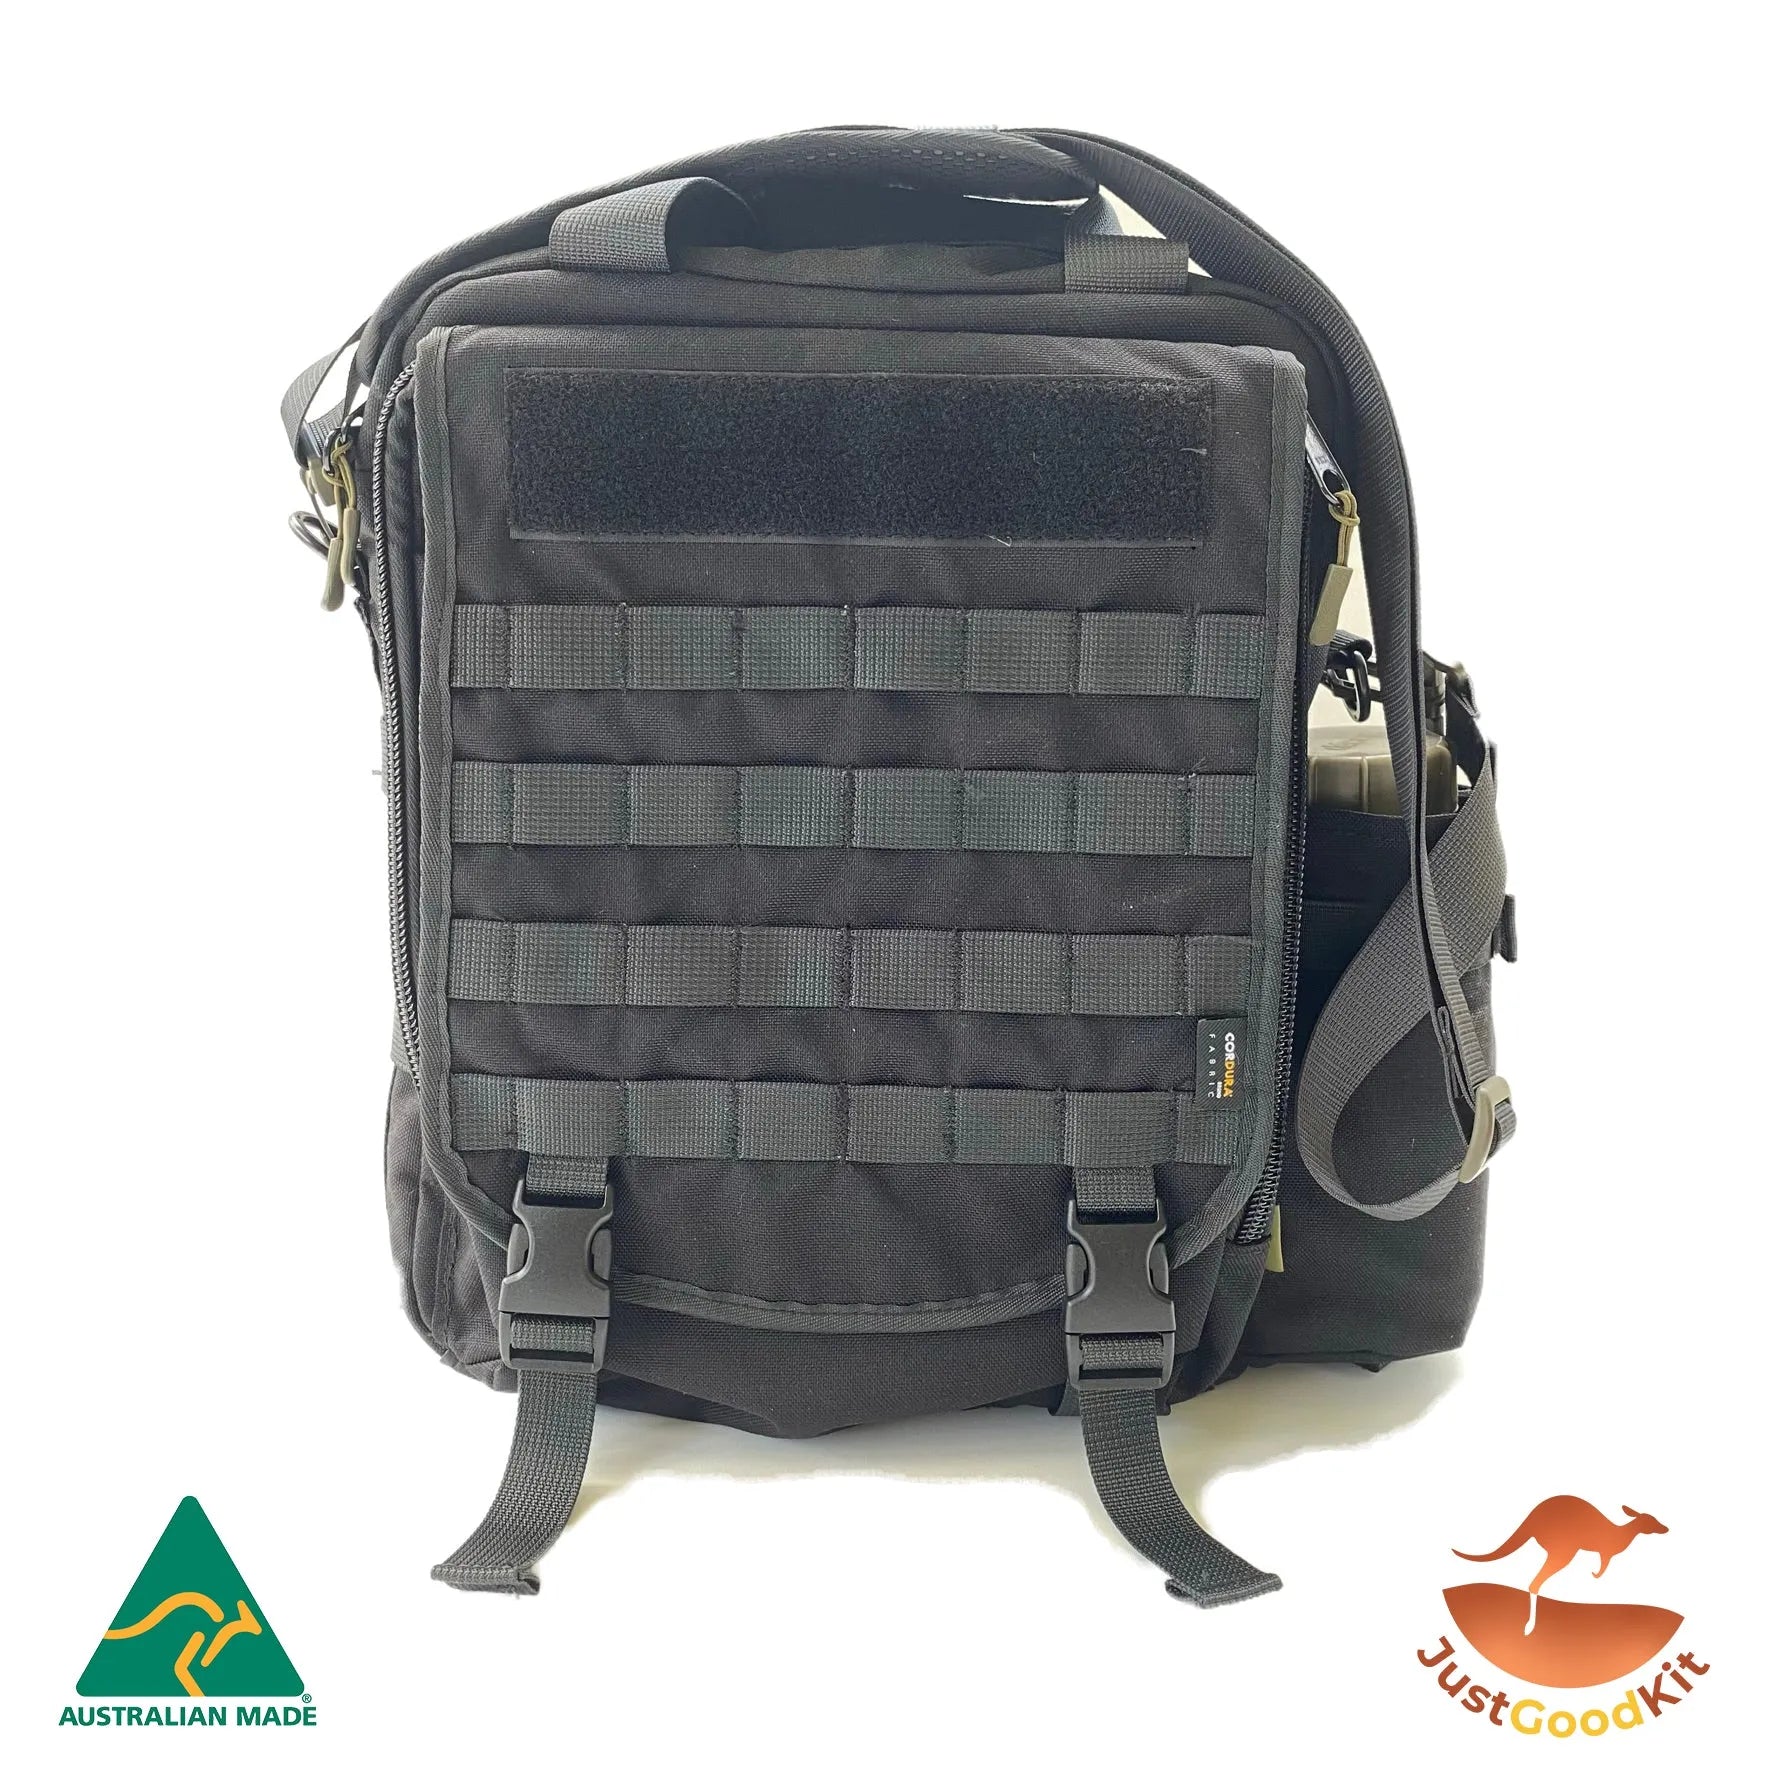 Tactical Bag for Laptop and Field Administration JustGoodKit Tactical Laptop Bag for Field Administration Tactical Bag for Field Administration